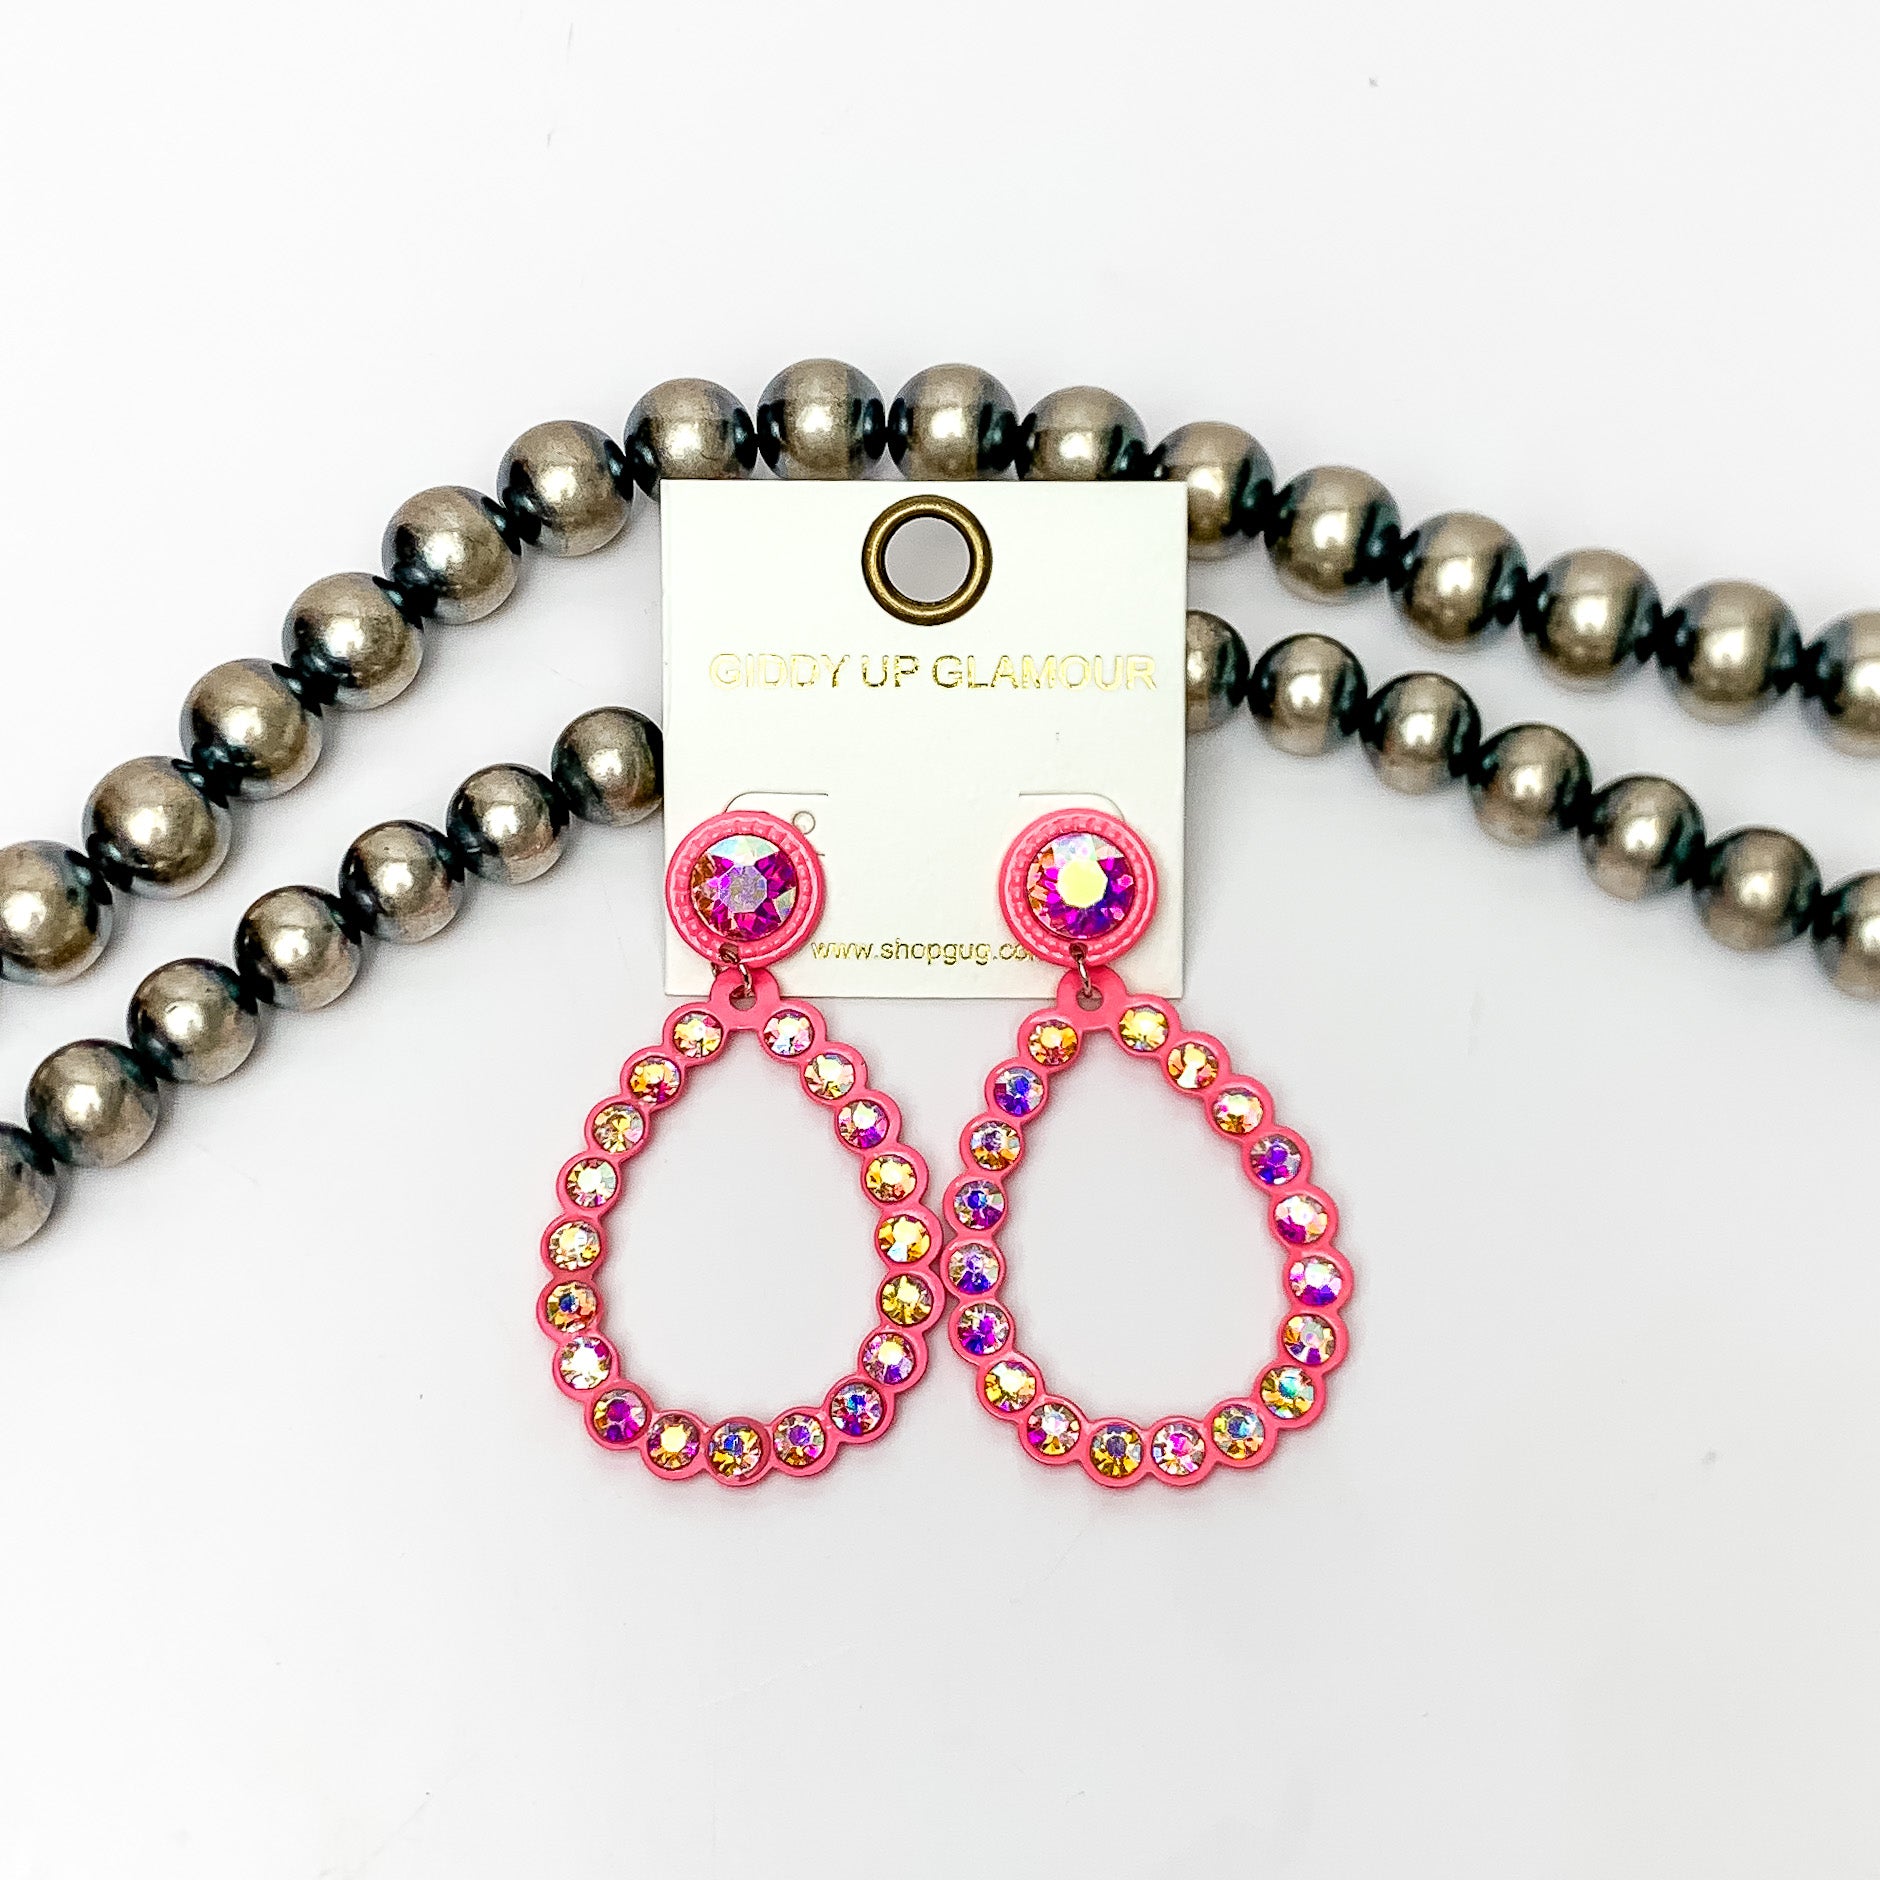 Glitzy Girl AB Crystal Teardrop Earrings in Hot Pink. Pictured on a white background with Navajo pearls behind the earrings.